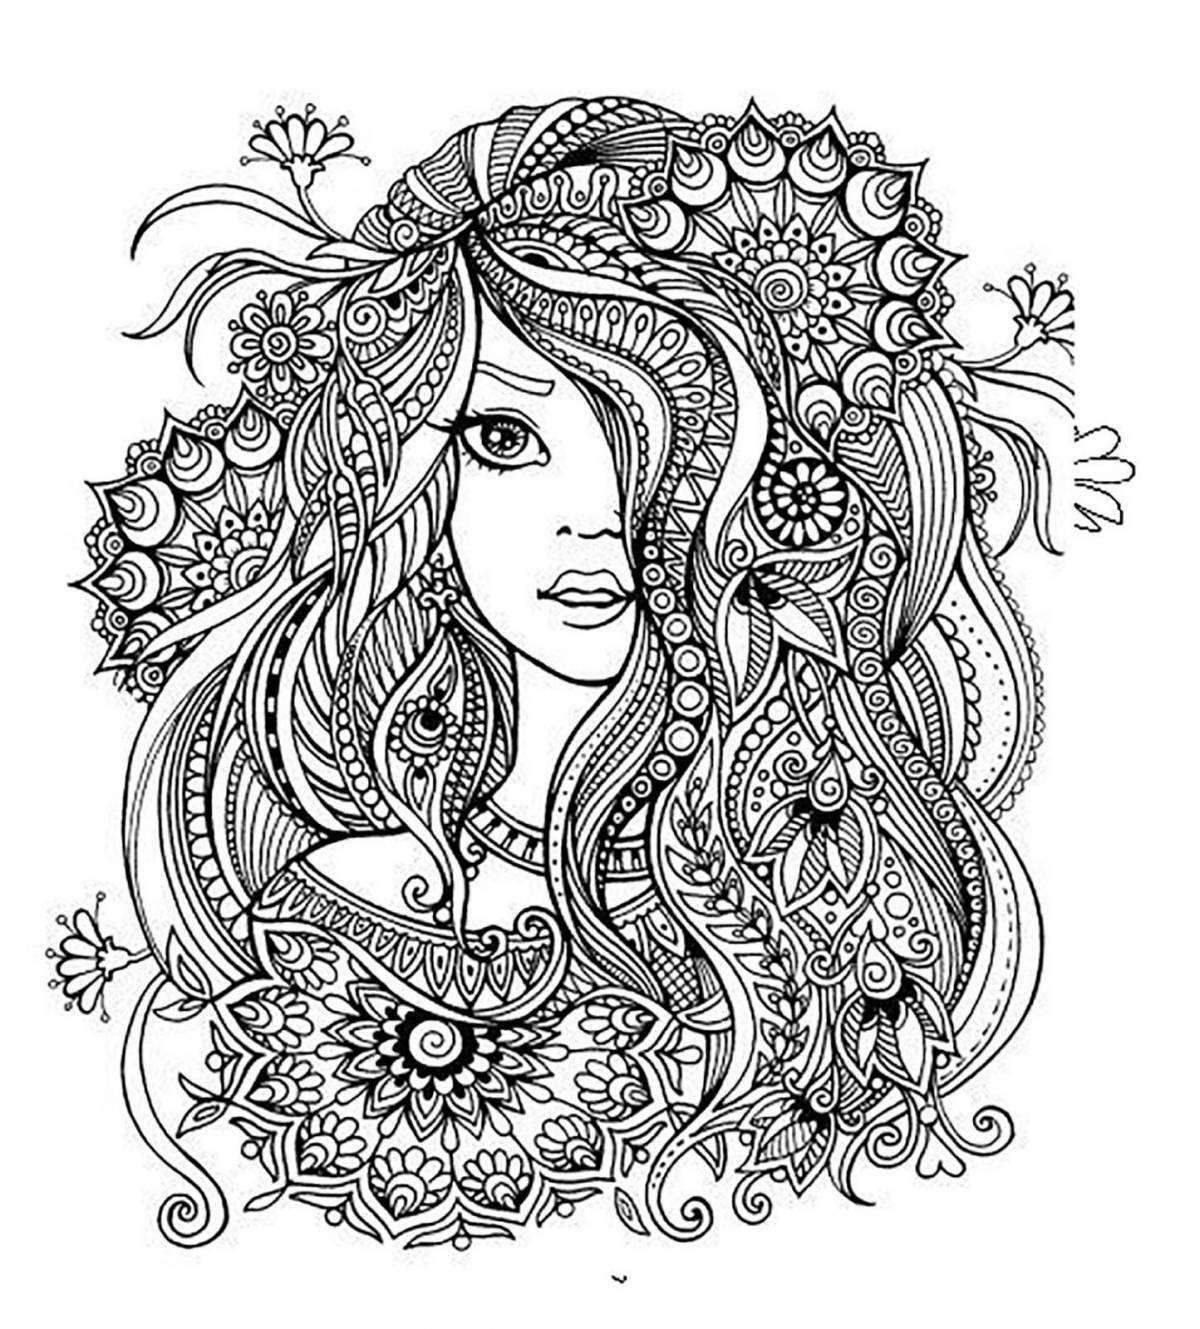 Fun coloring pages with intricate patterns for girls